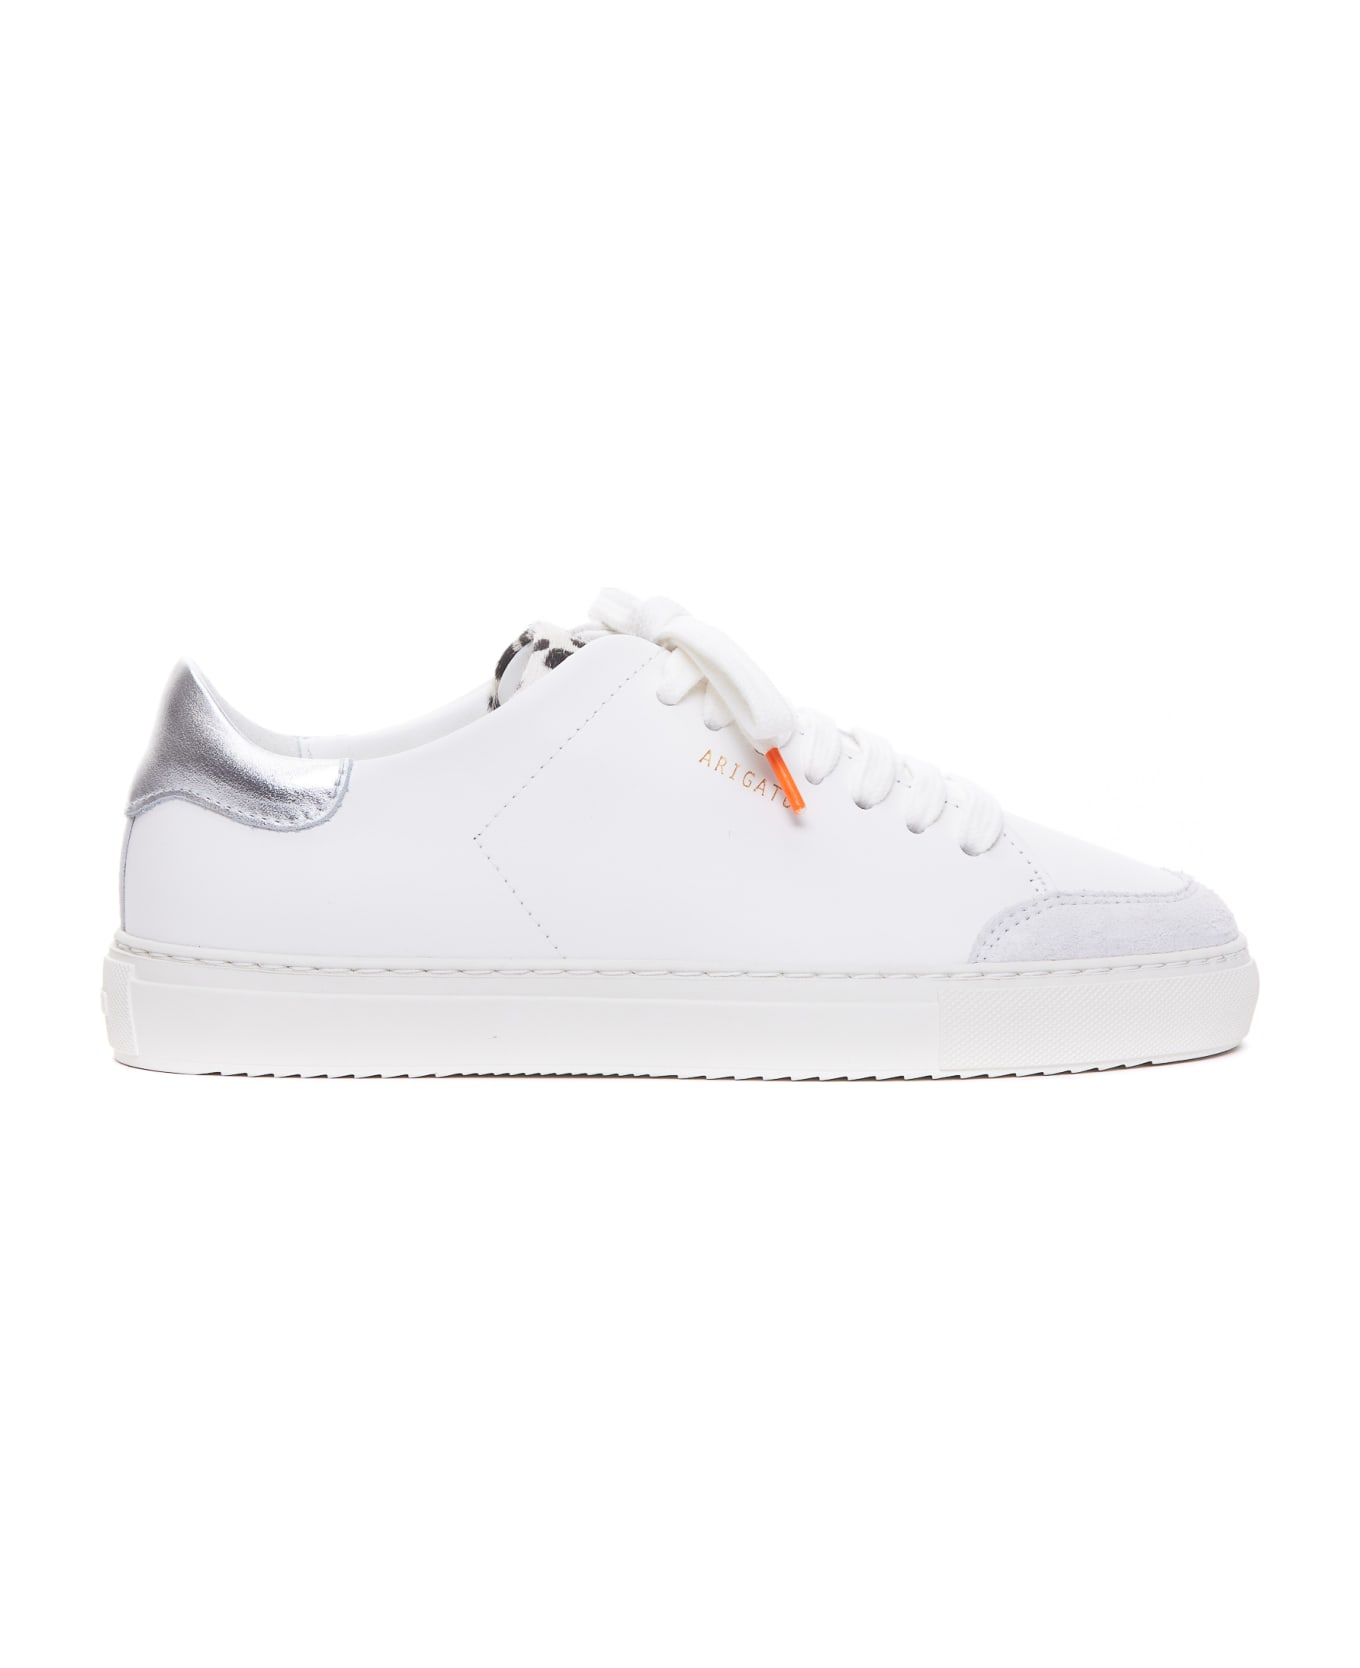 Axel Arigato Clean 91 Triple Sneakers - White Silver スニーカー